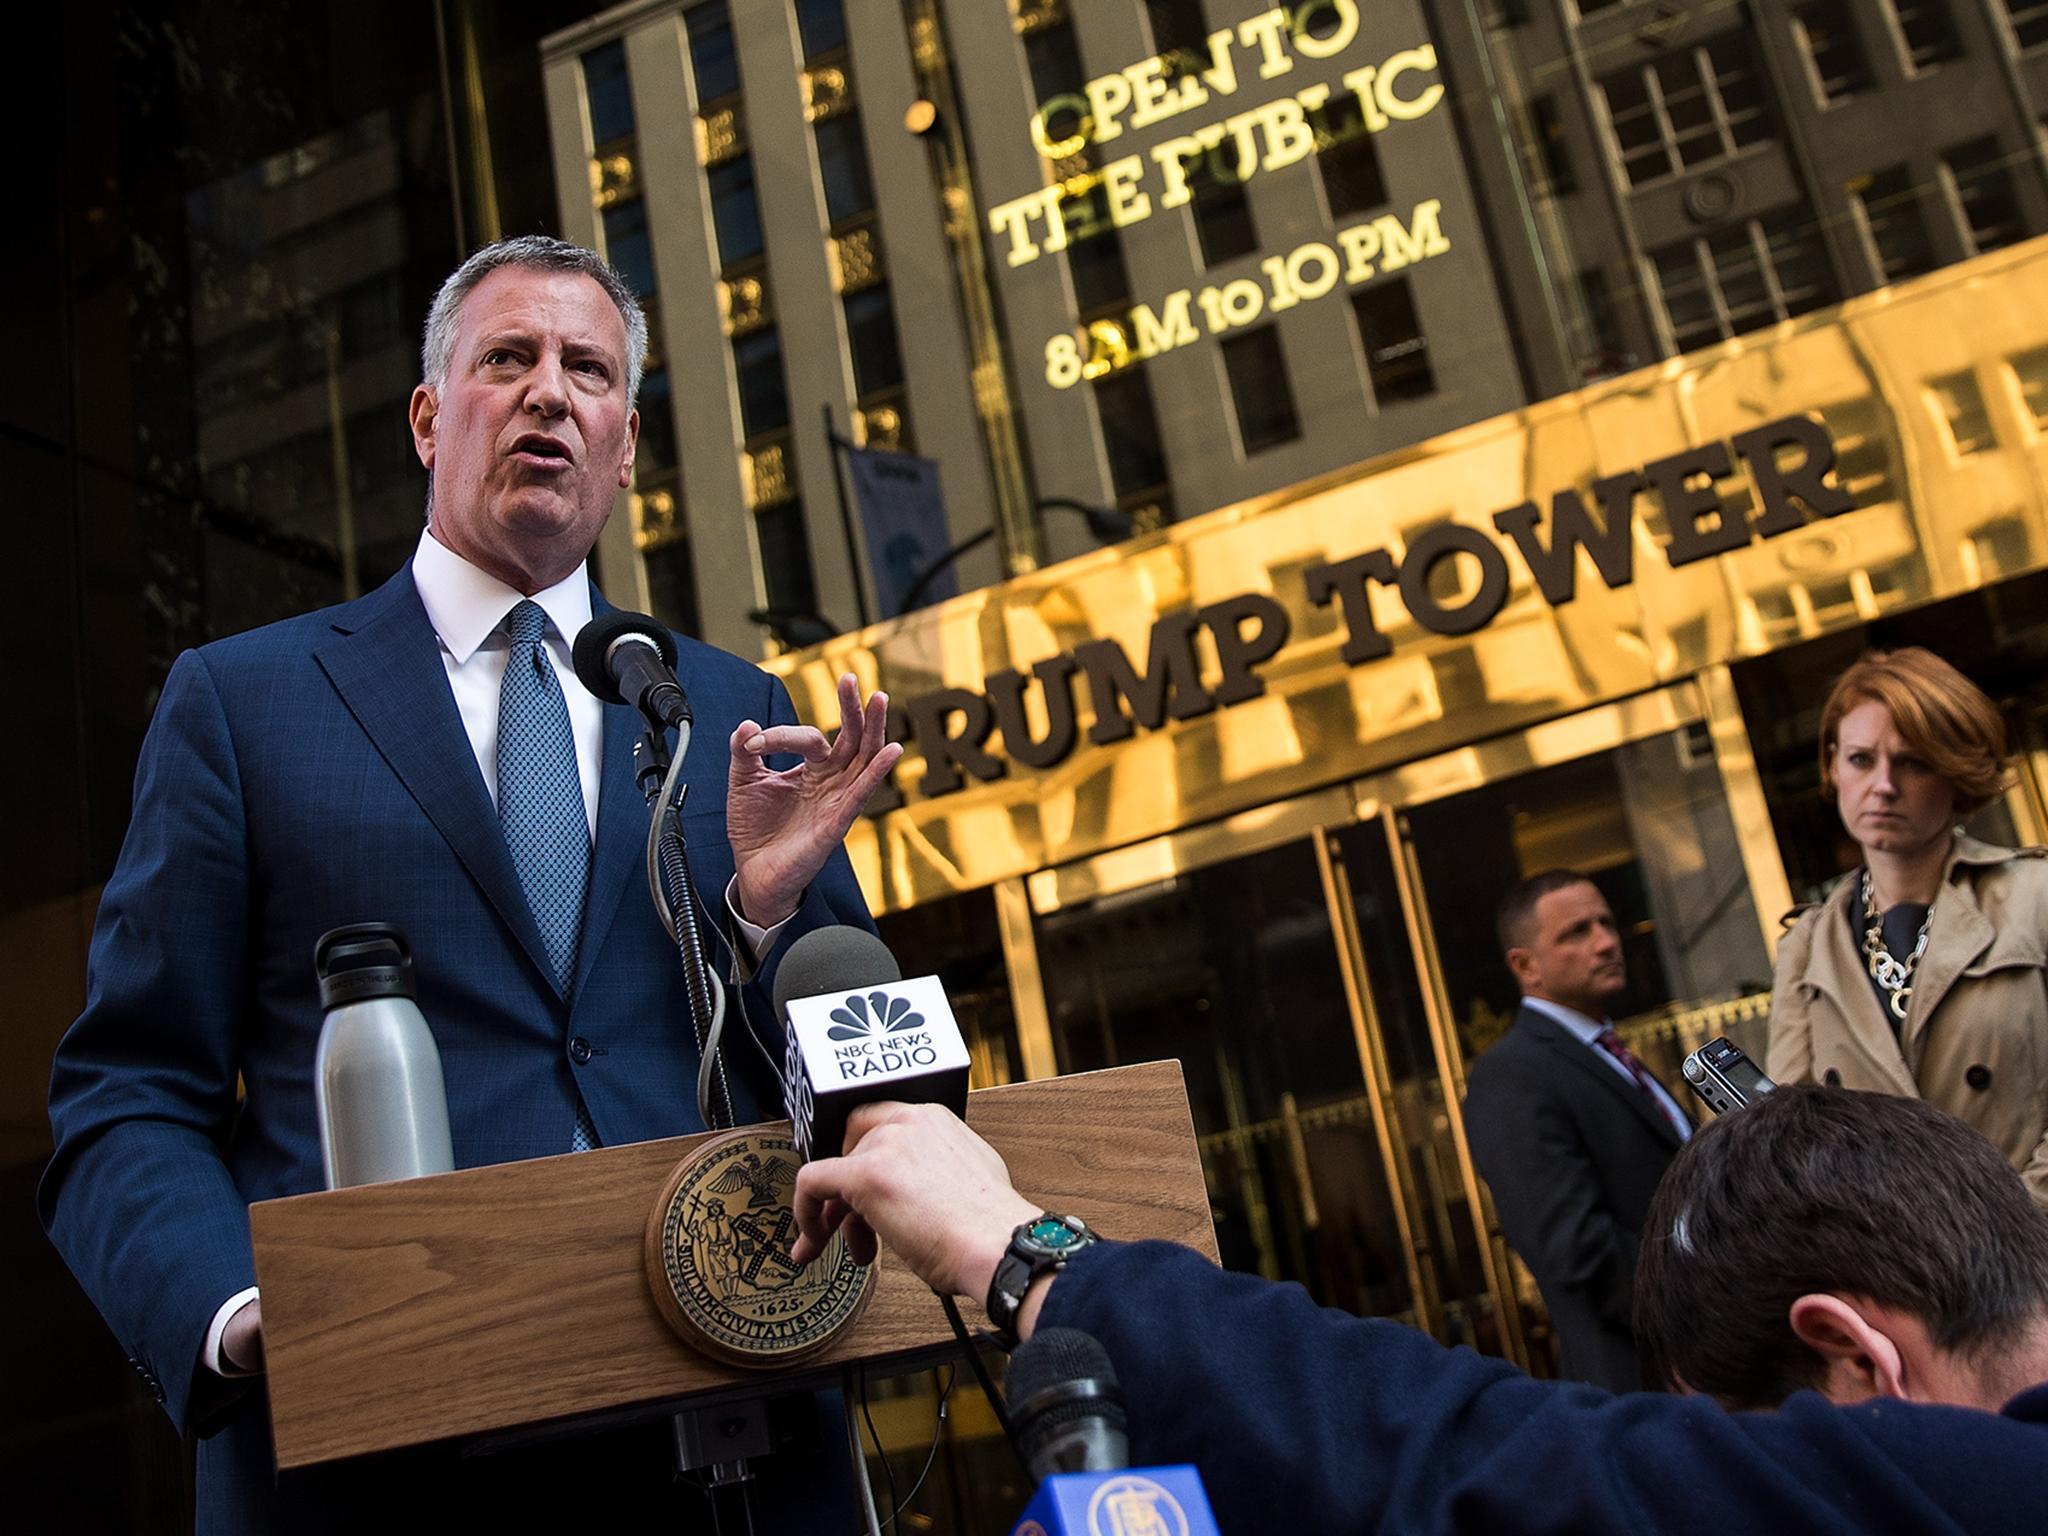 New York mayor Bill de Blasio said he refused to "tear families apart" after meeting Donald Trump at Trump Tower